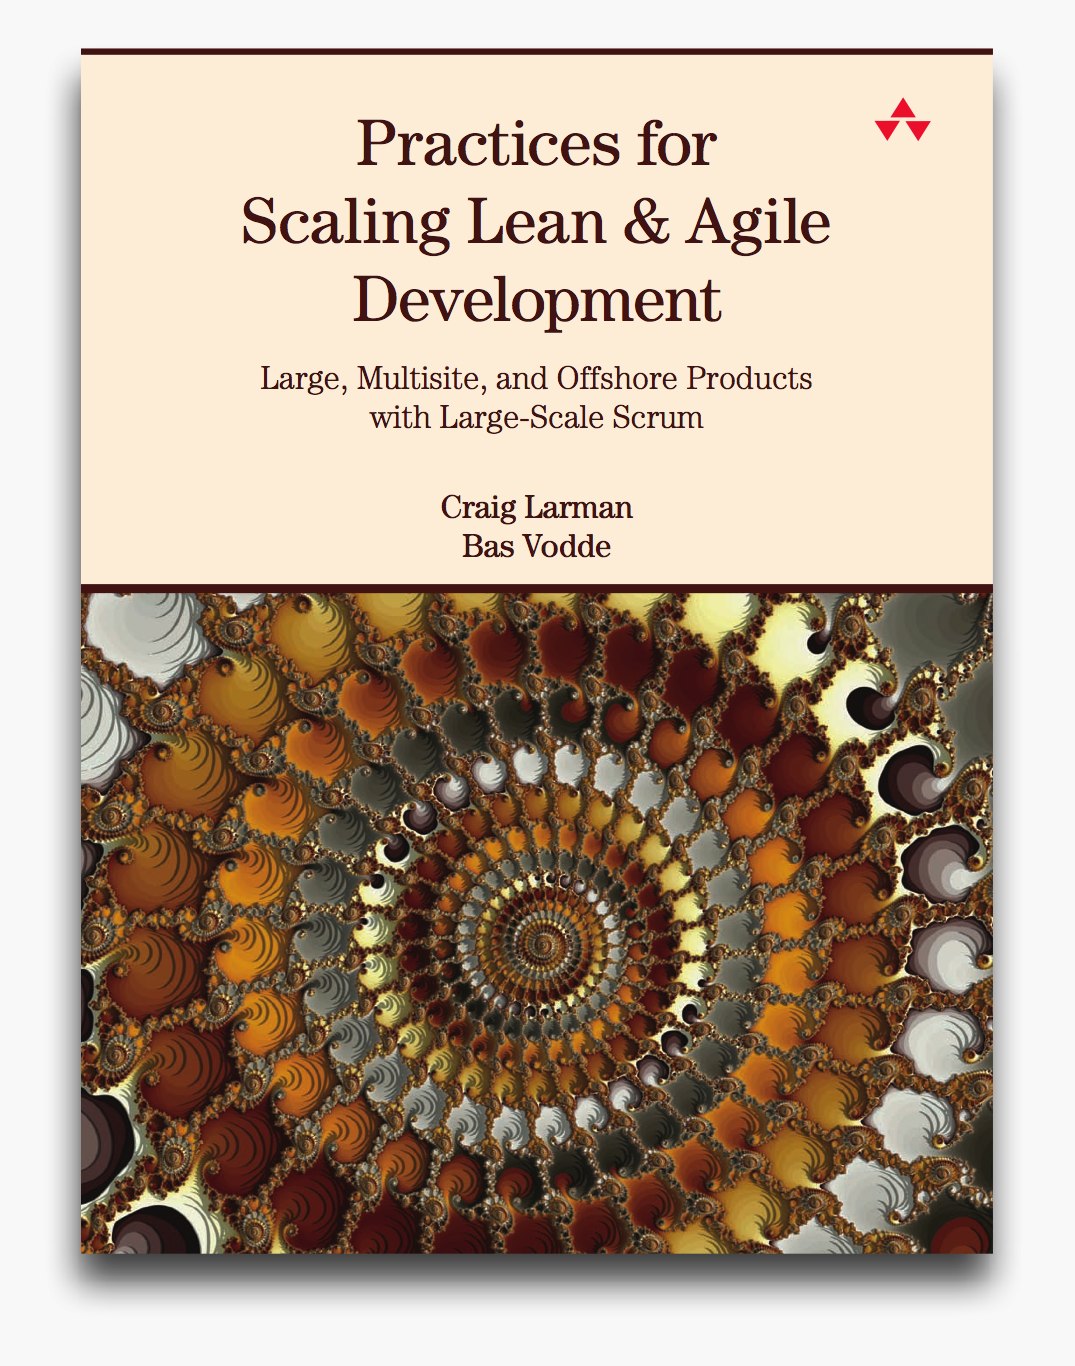 Practices For Scaling Lean and Agile Development